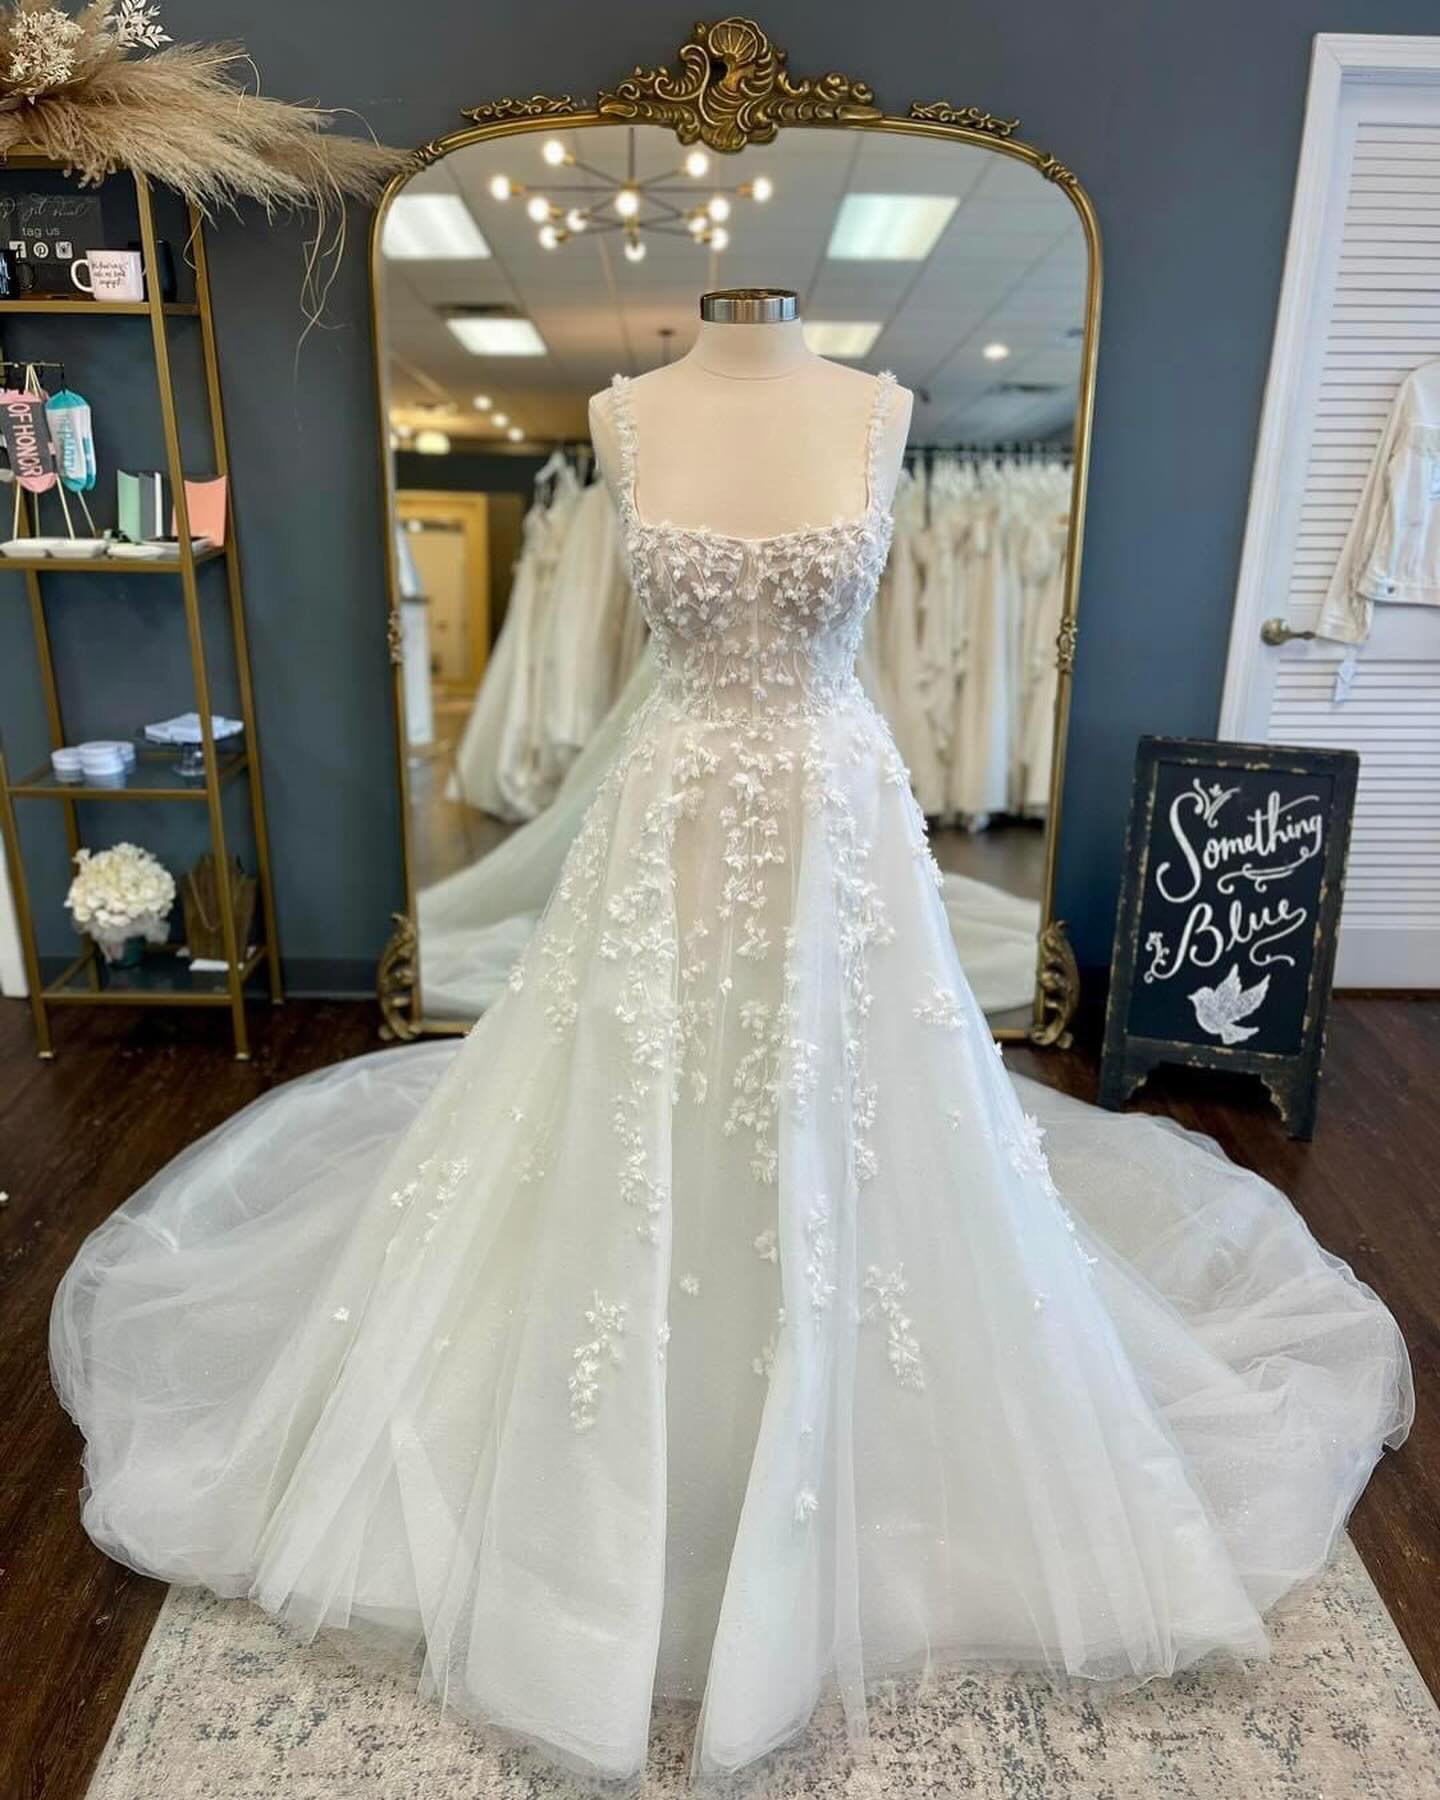 Brand new just in time for #WeddingGownWednesday! 

This stunning new ballgown features a square neckline, fun 3D florals and beautiful sparkles throughout! She is absolutely gorgeous!! You can try this dress on in store in a size 14 and we can order